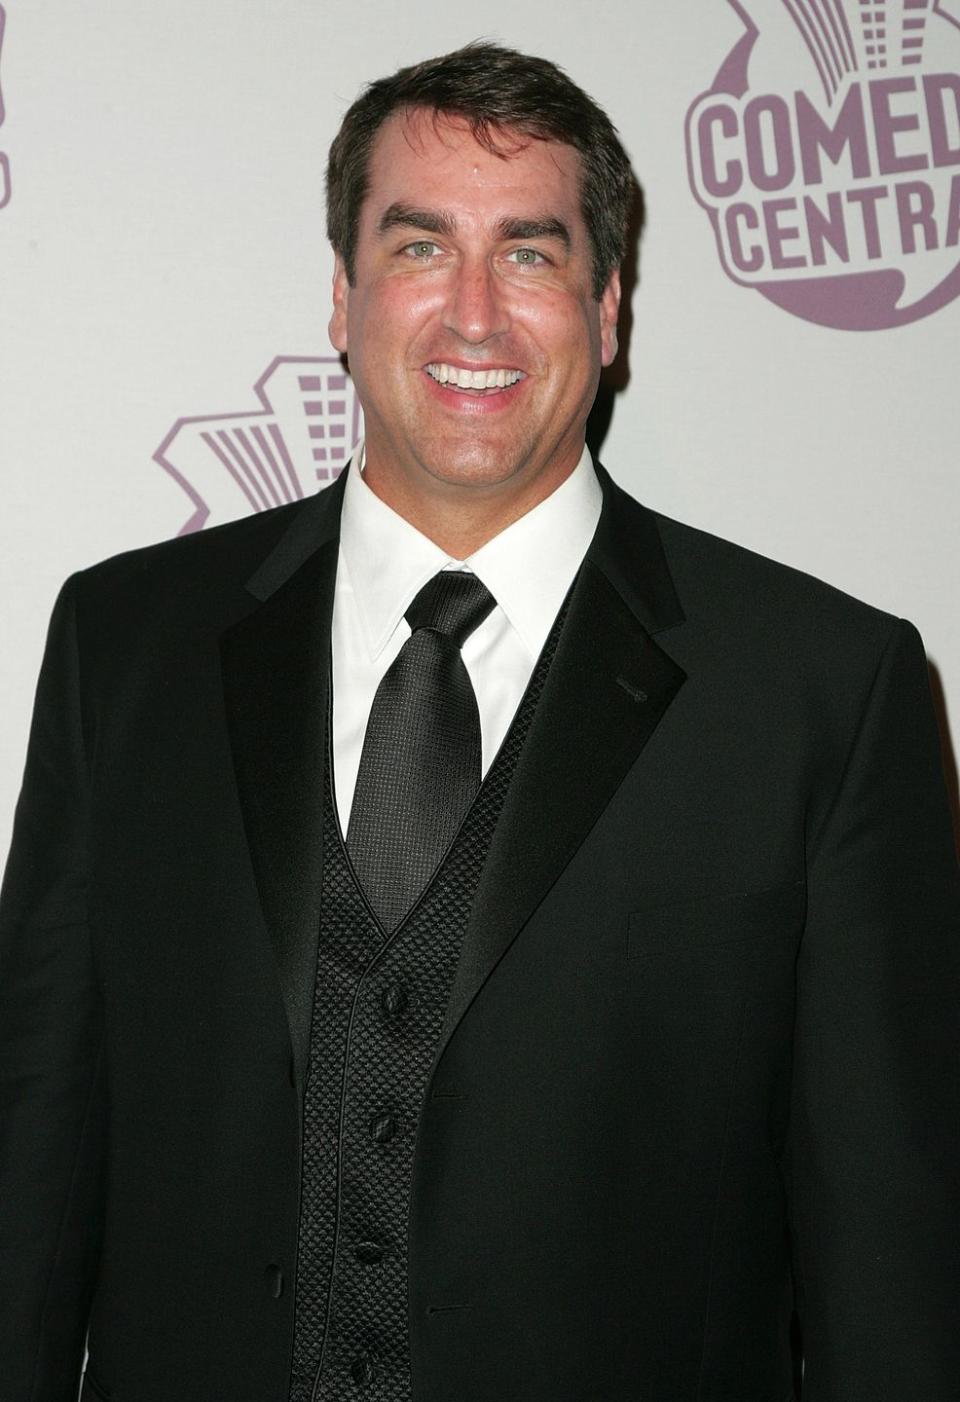 Then: Rob Riggle